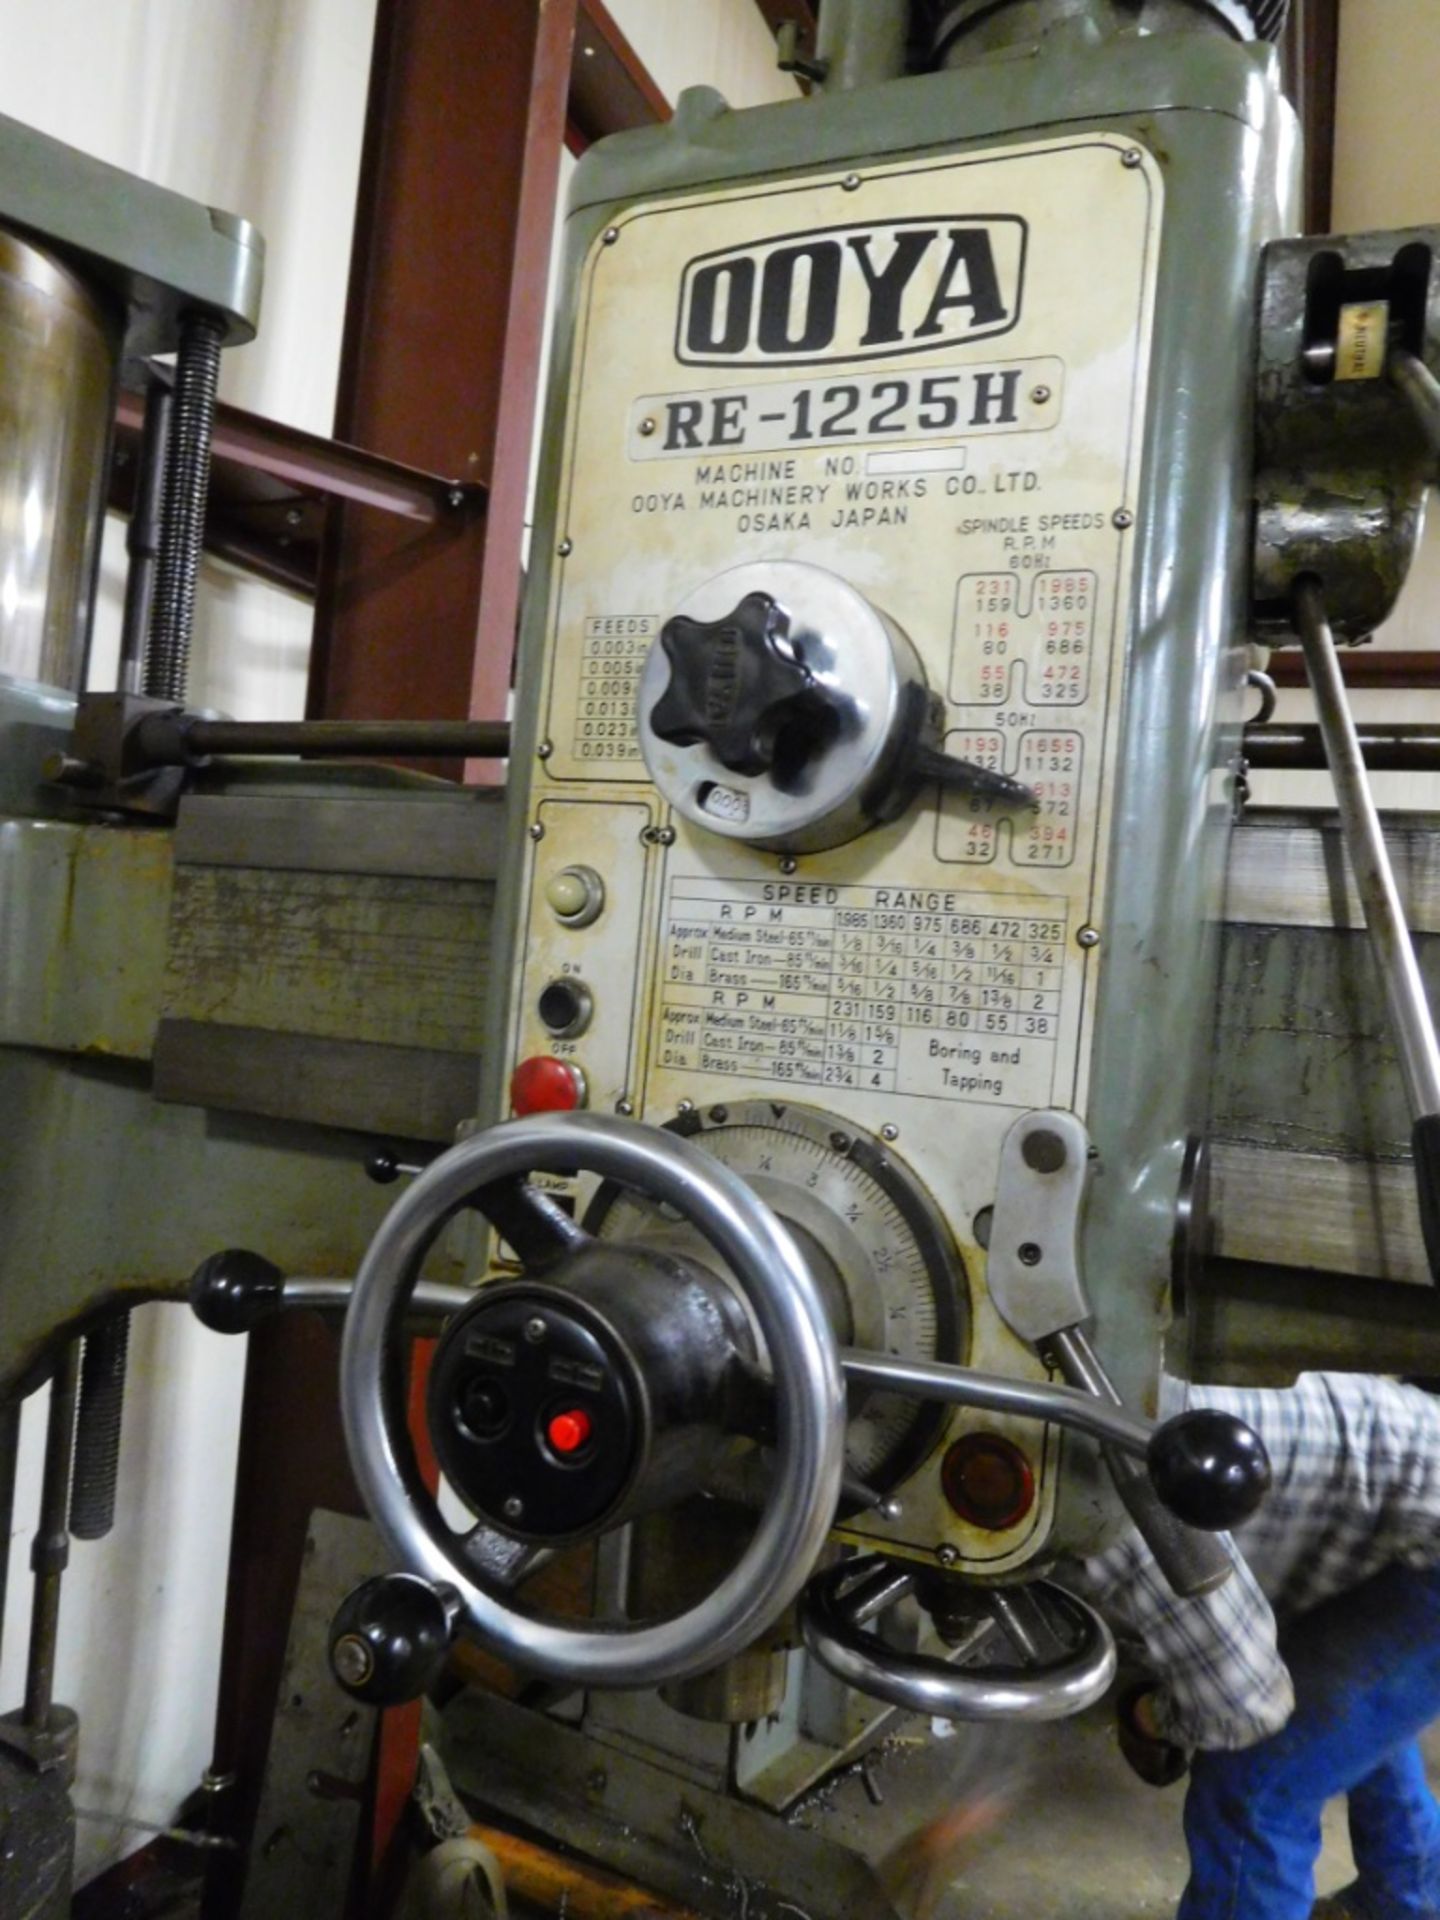 OOYA Radial Arm Drill Model RE-1225H - Image 2 of 3